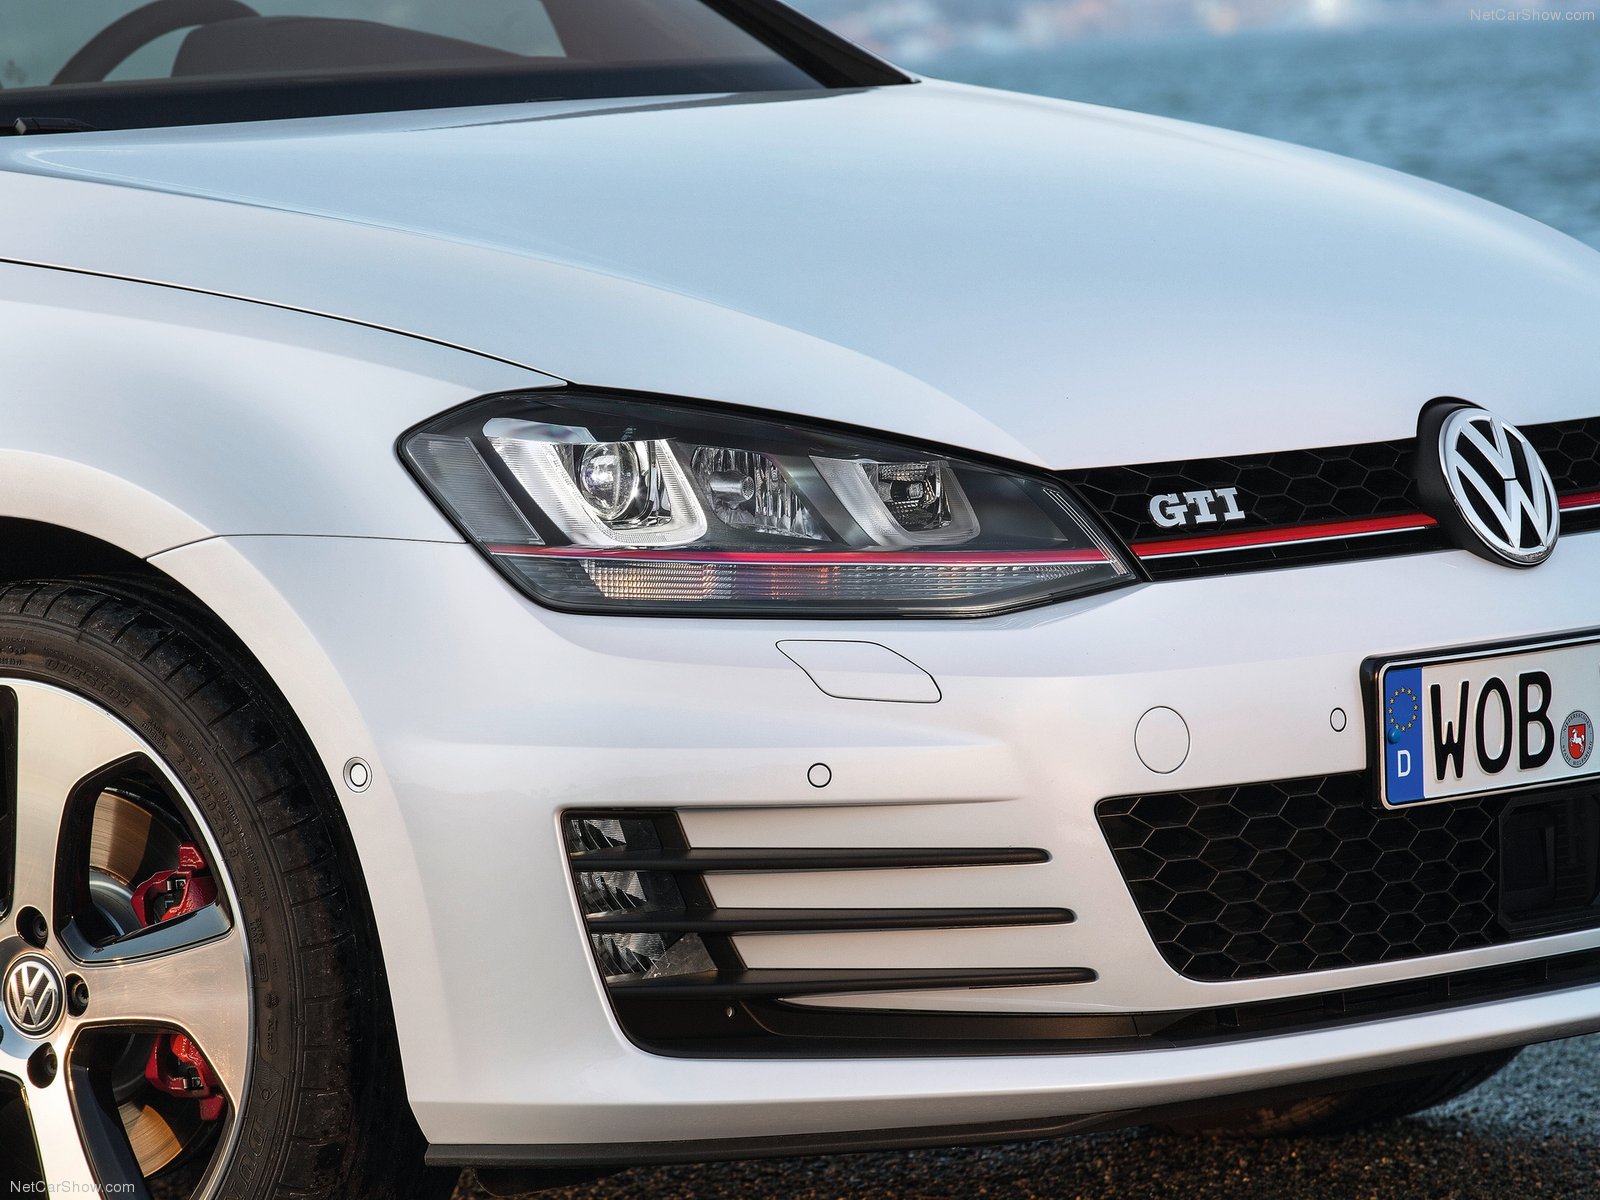 2014 Volkswagen Golf Gti Review Spec Release Date Picture And Price